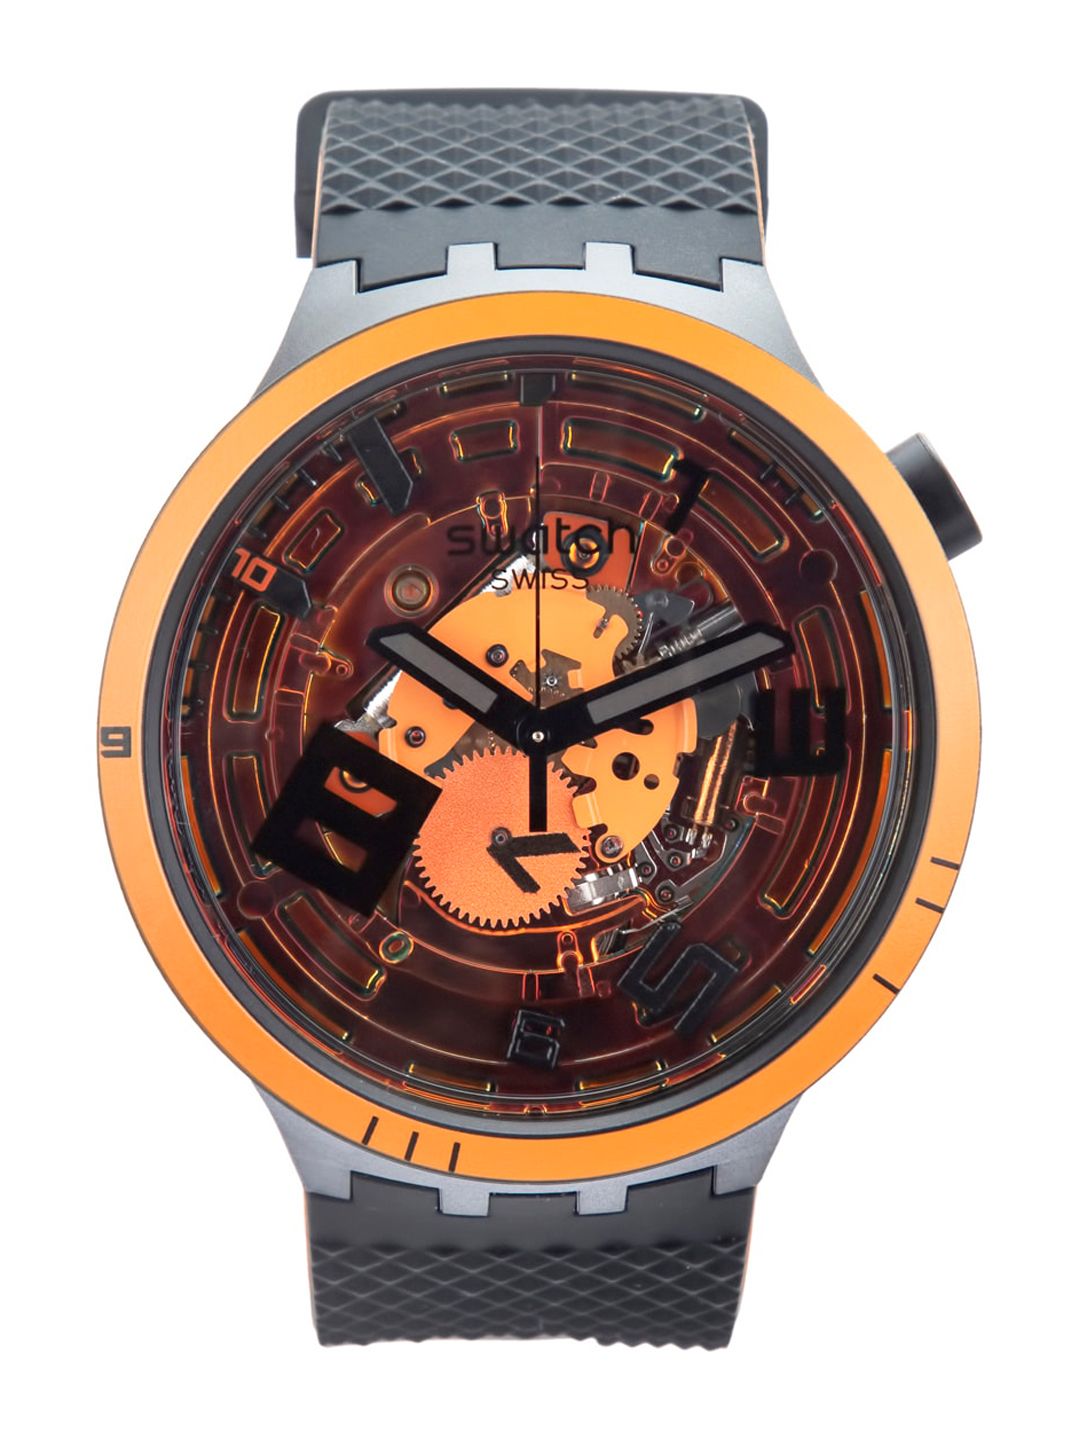 Swatch Unisex Mustard Yellow Printed Dial & Black Straps Water Resistant Analogue Watch SB01B127 Price in India